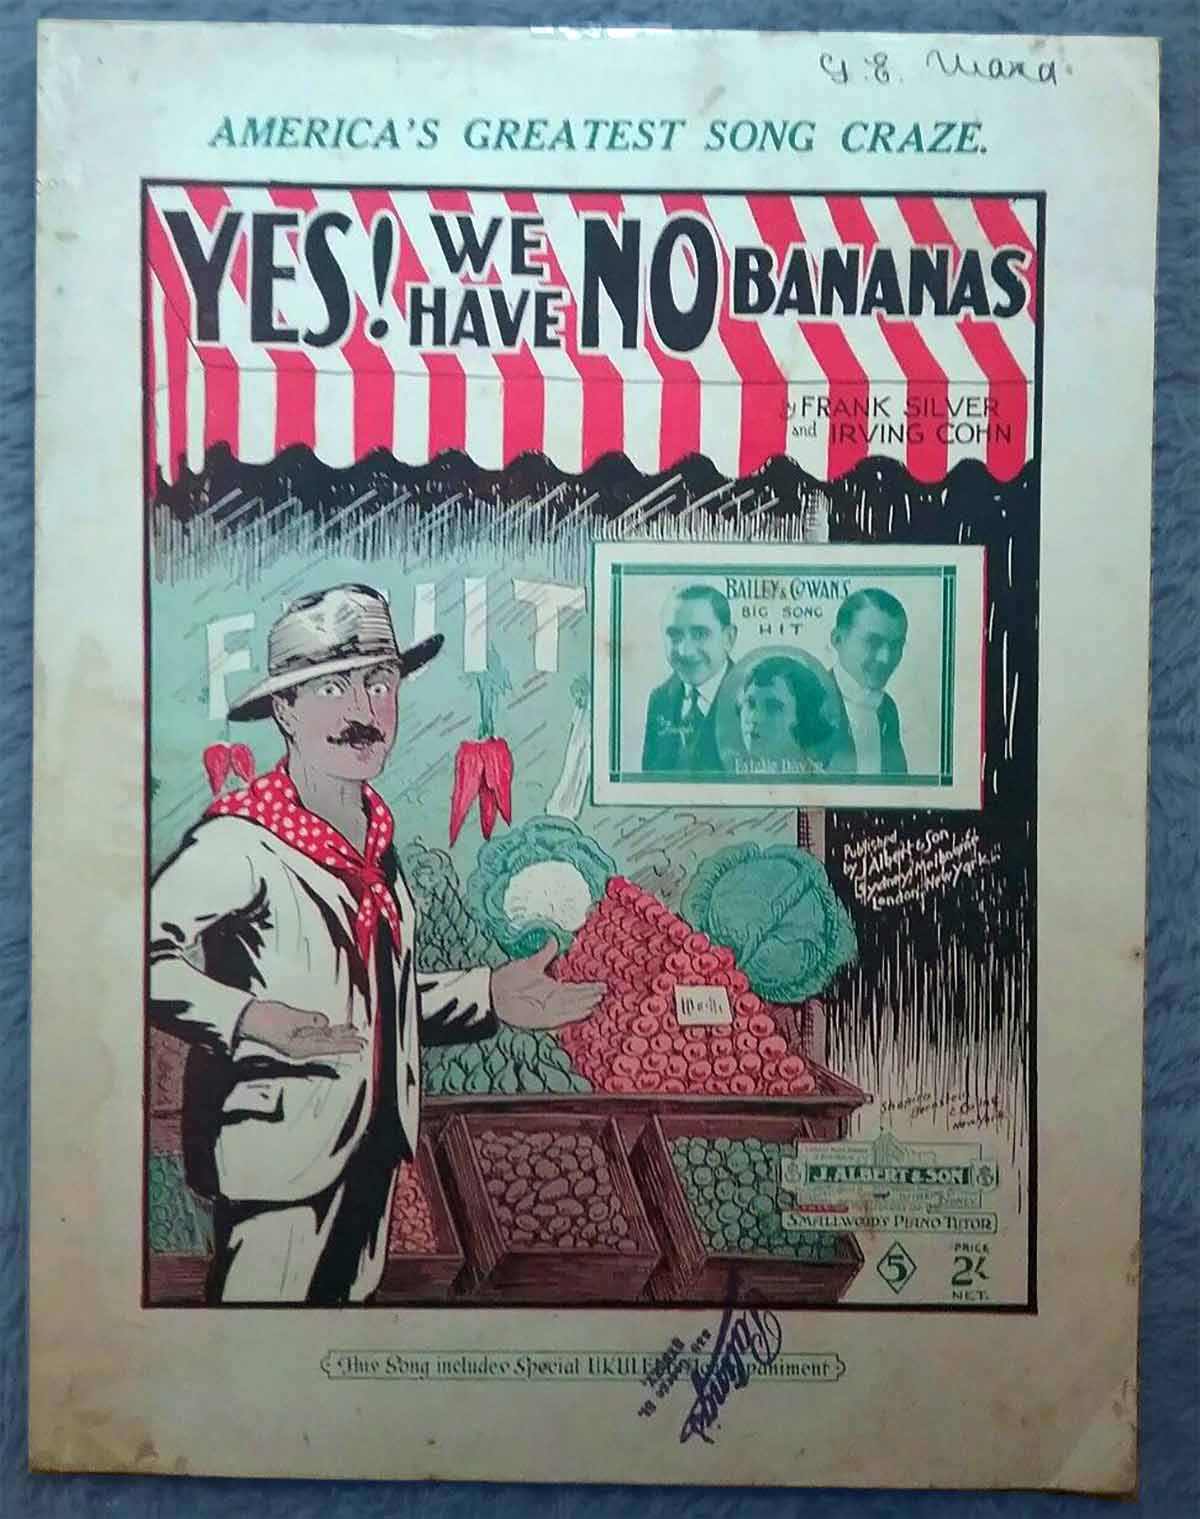 a 1920's songbook for "Yes, We Have No Bananas"